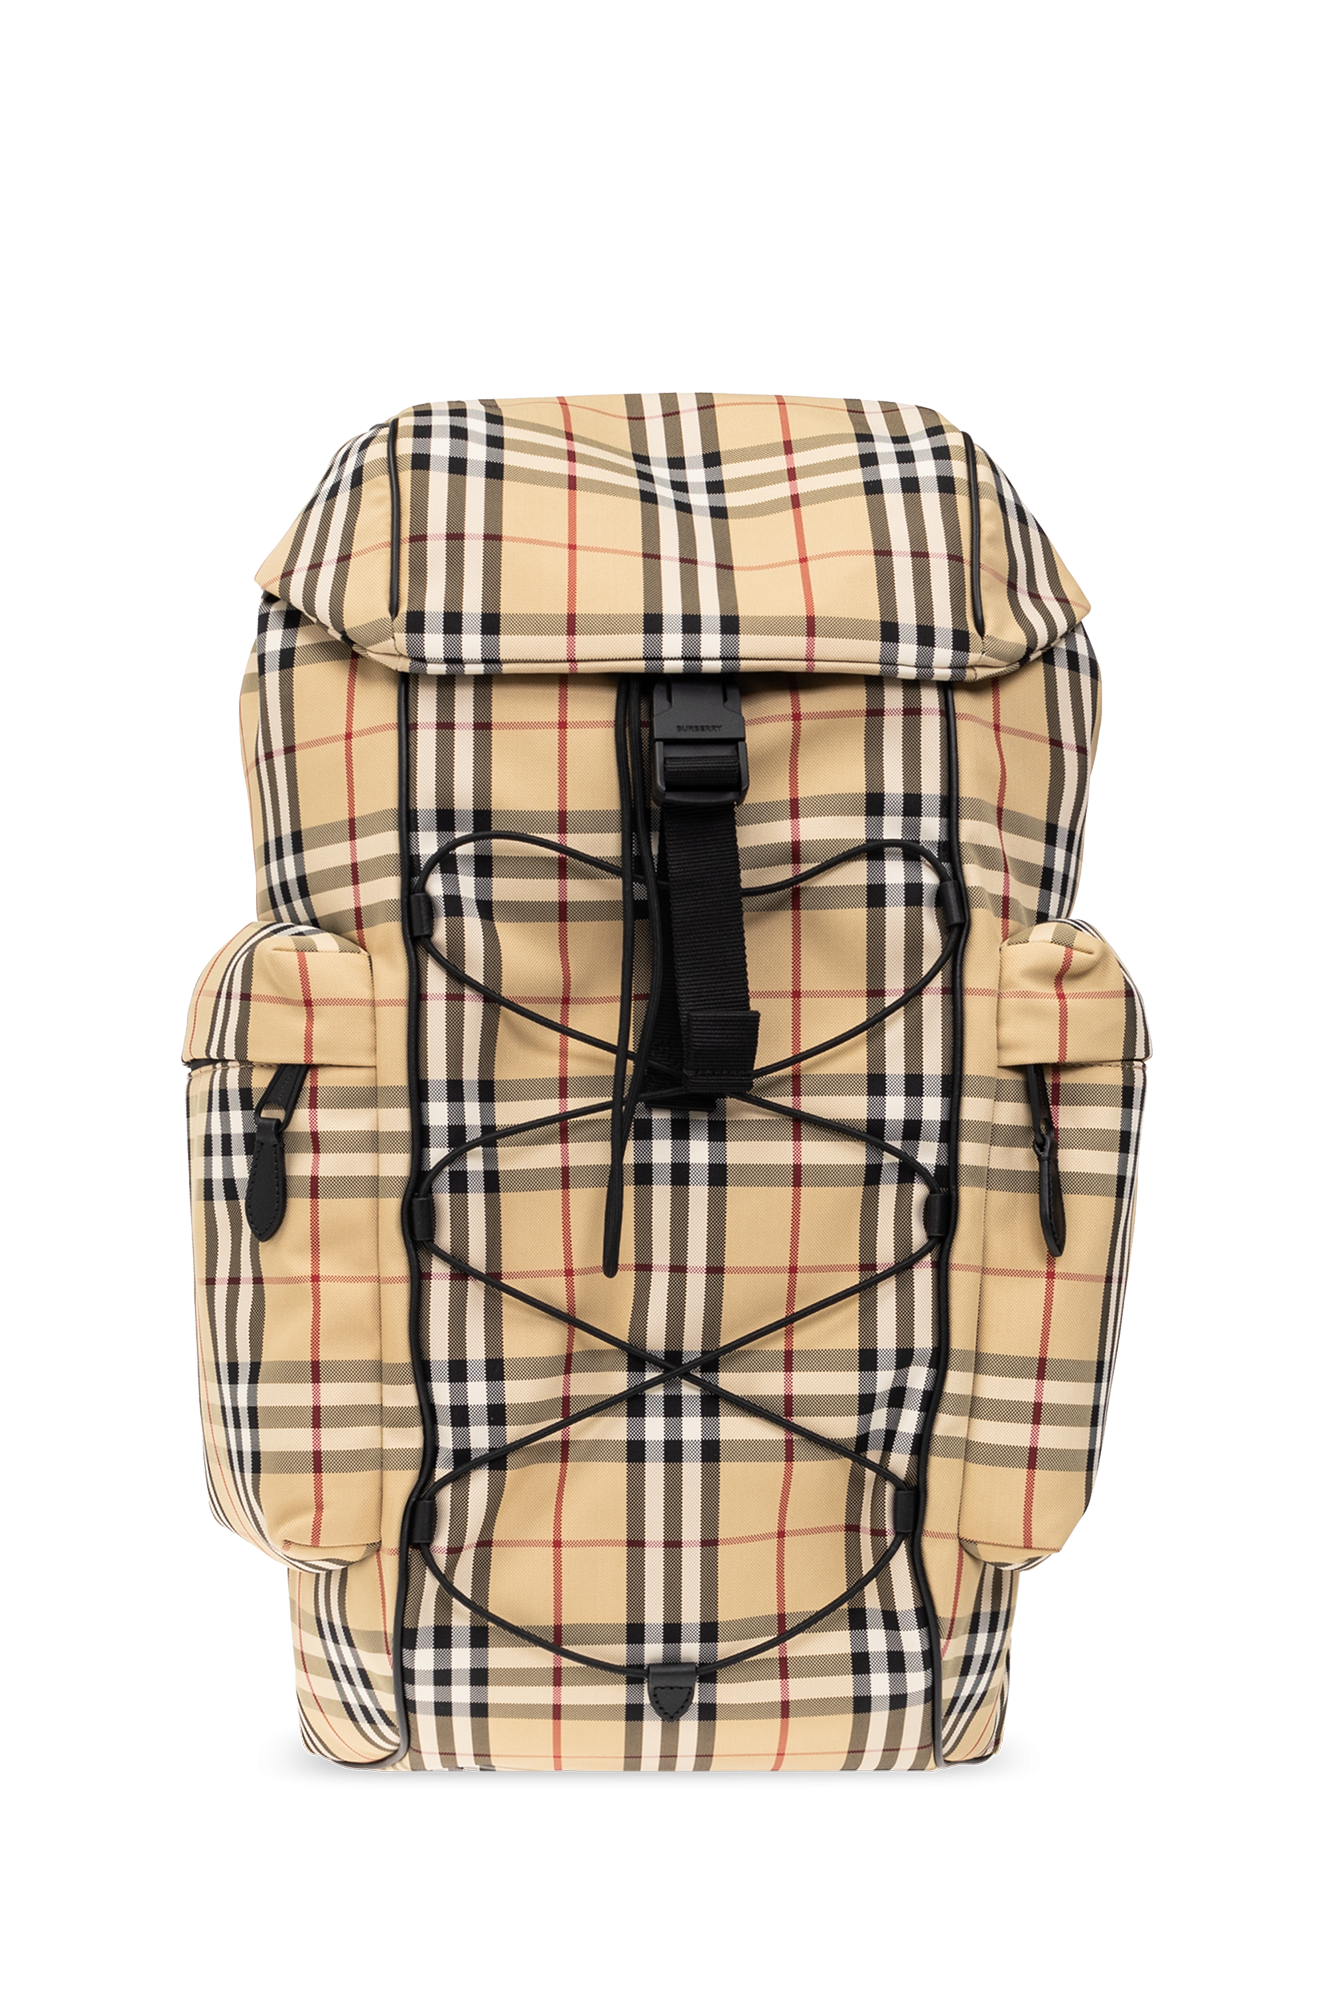 burberry cufflinks ‘Murray’ checked backpack